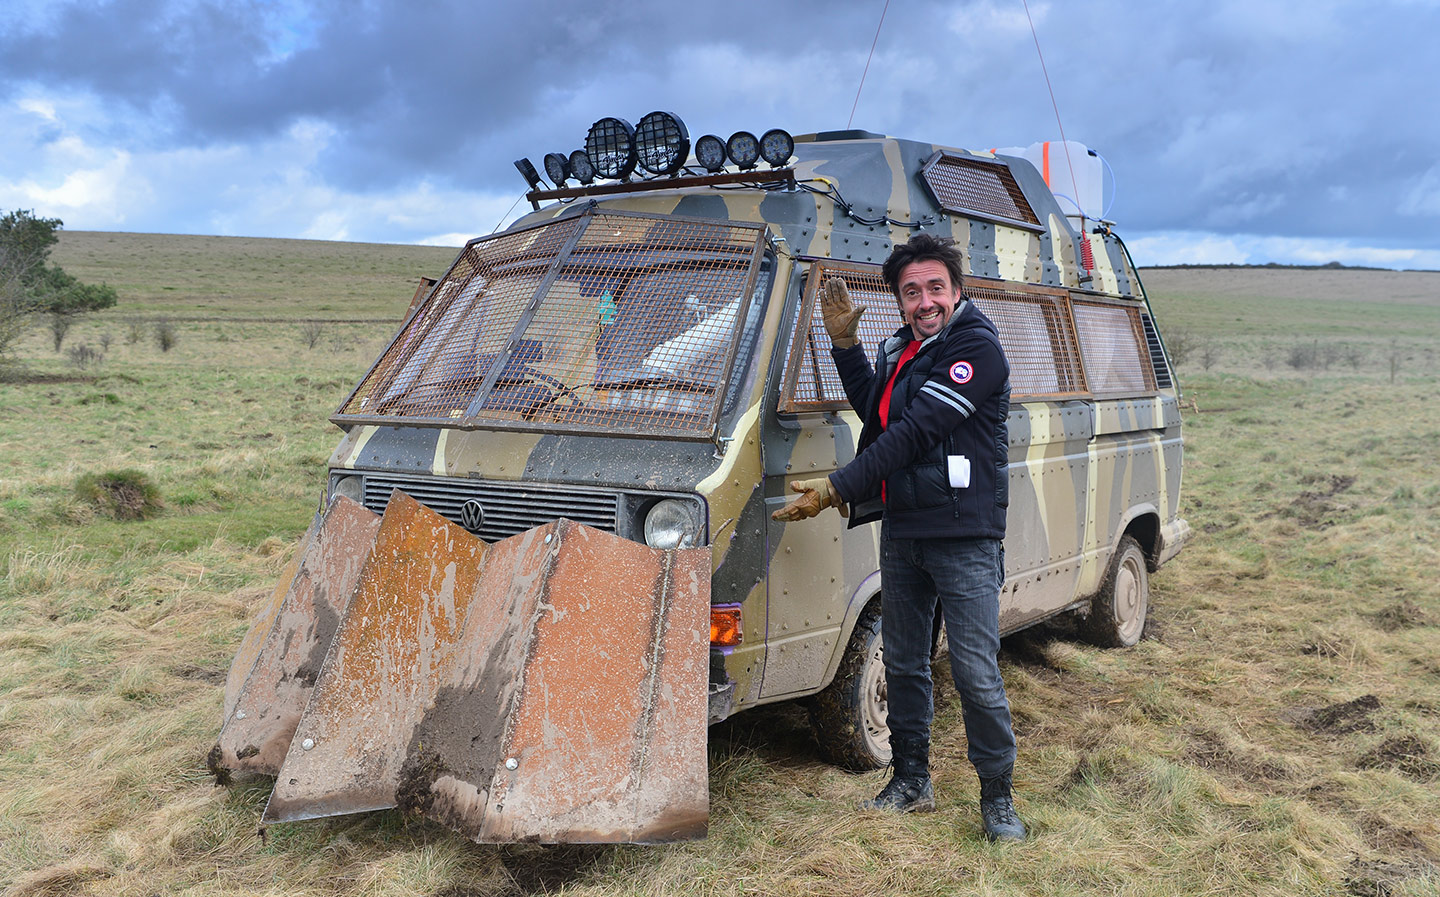 THE WANDERER Richard Hammond test-drives a cataclysm-proof “bug-out vehicle” for the new show on a tank training ground in southern England